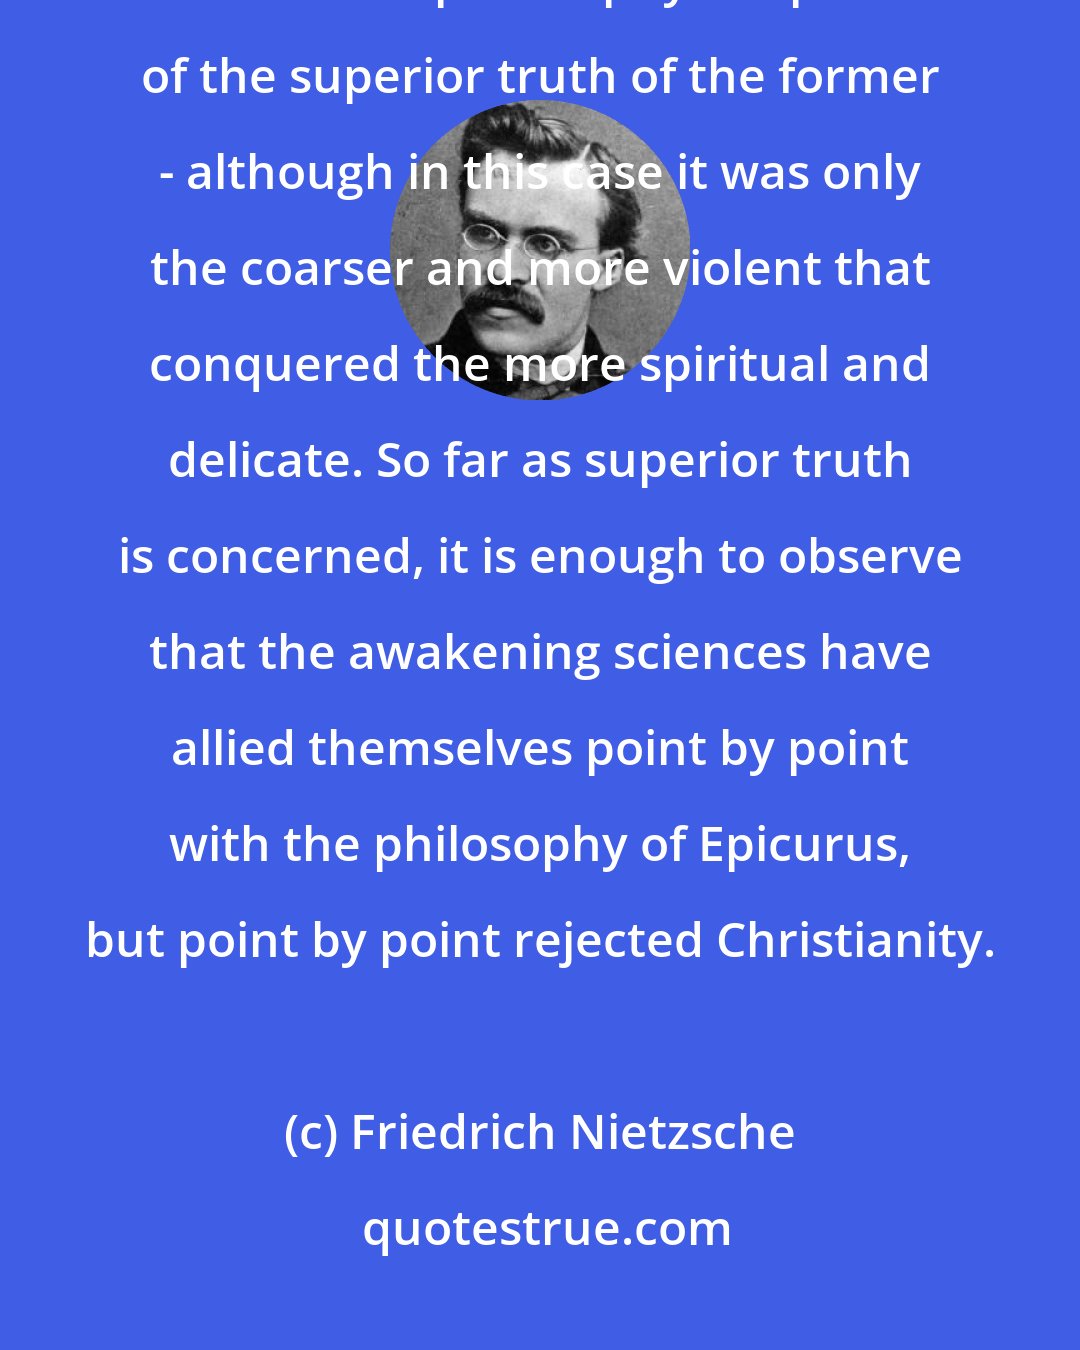 Friedrich Nietzsche: Even today many educated people think that the victory of Christianity over Greek philosophy is a proof of the superior truth of the former - although in this case it was only the coarser and more violent that conquered the more spiritual and delicate. So far as superior truth is concerned, it is enough to observe that the awakening sciences have allied themselves point by point with the philosophy of Epicurus, but point by point rejected Christianity.